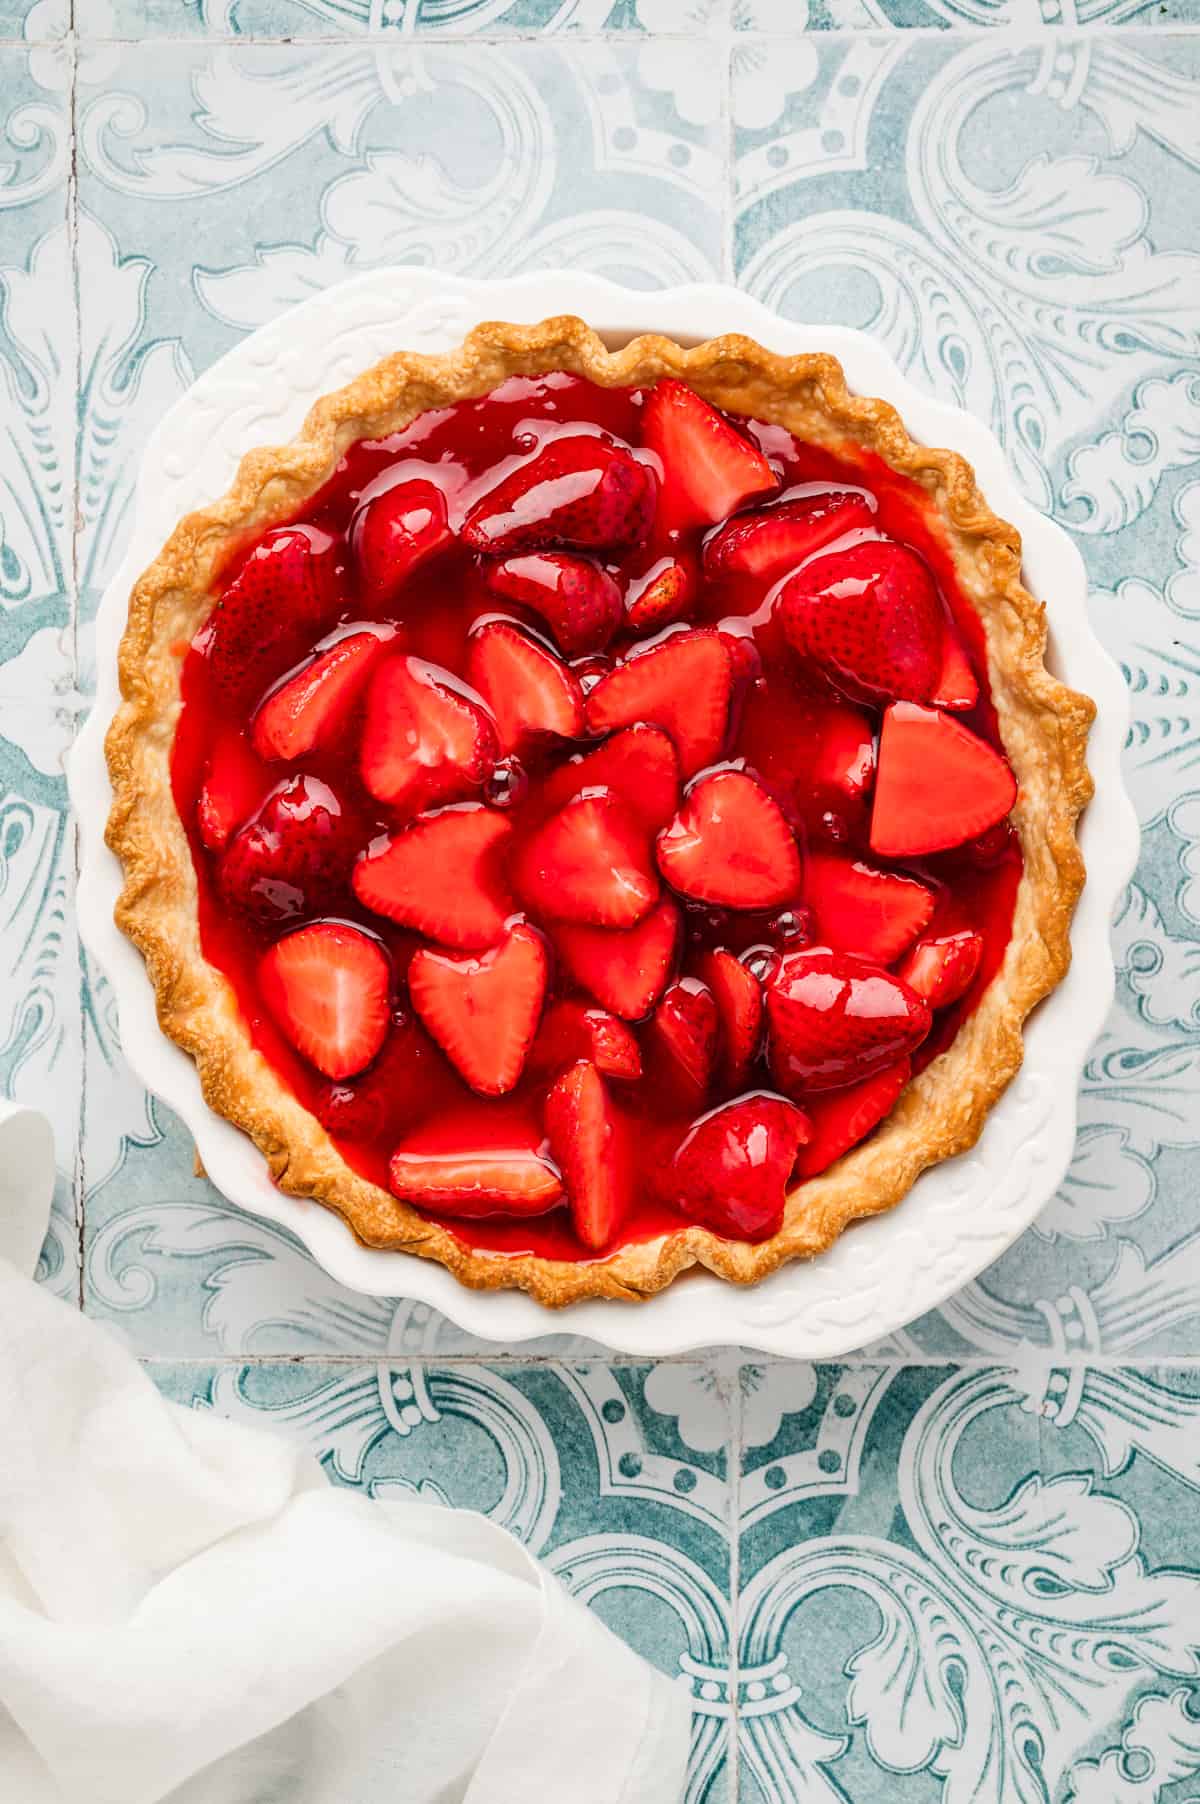 Adding Jell-O mixture over strawberries in crust-lined pie pan for Easy Strawberry Pie